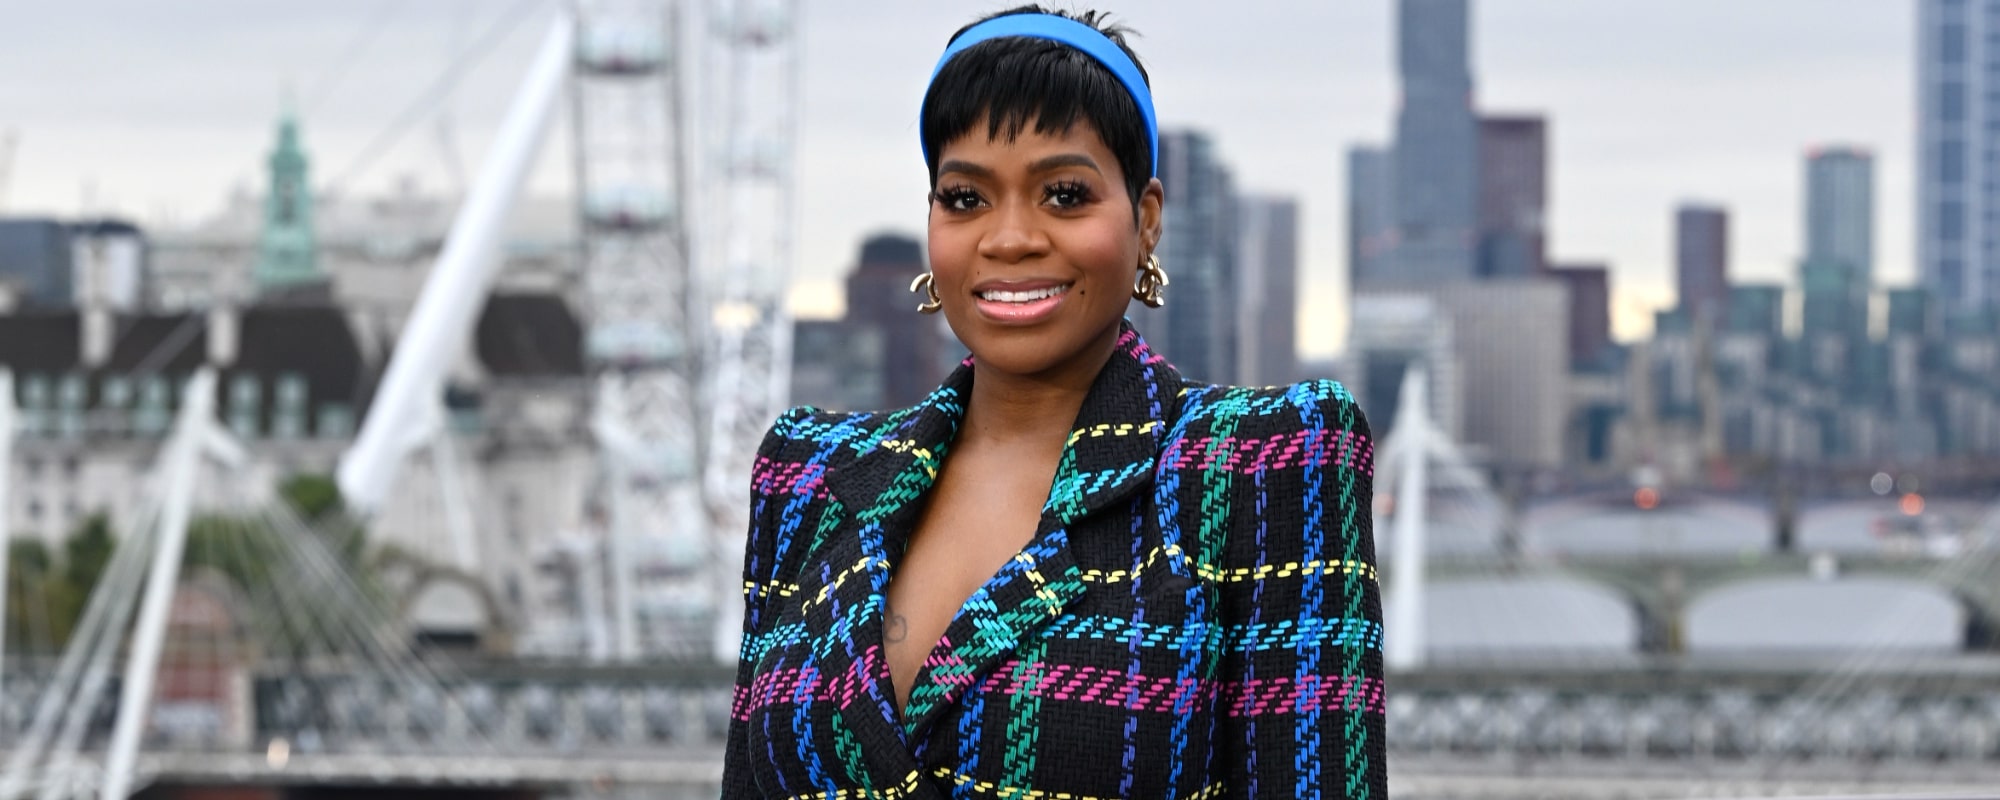 Fantasia Barrino’s Dazzling National Anthem Rendition at CFP National Championship Has Twitter Abuzz